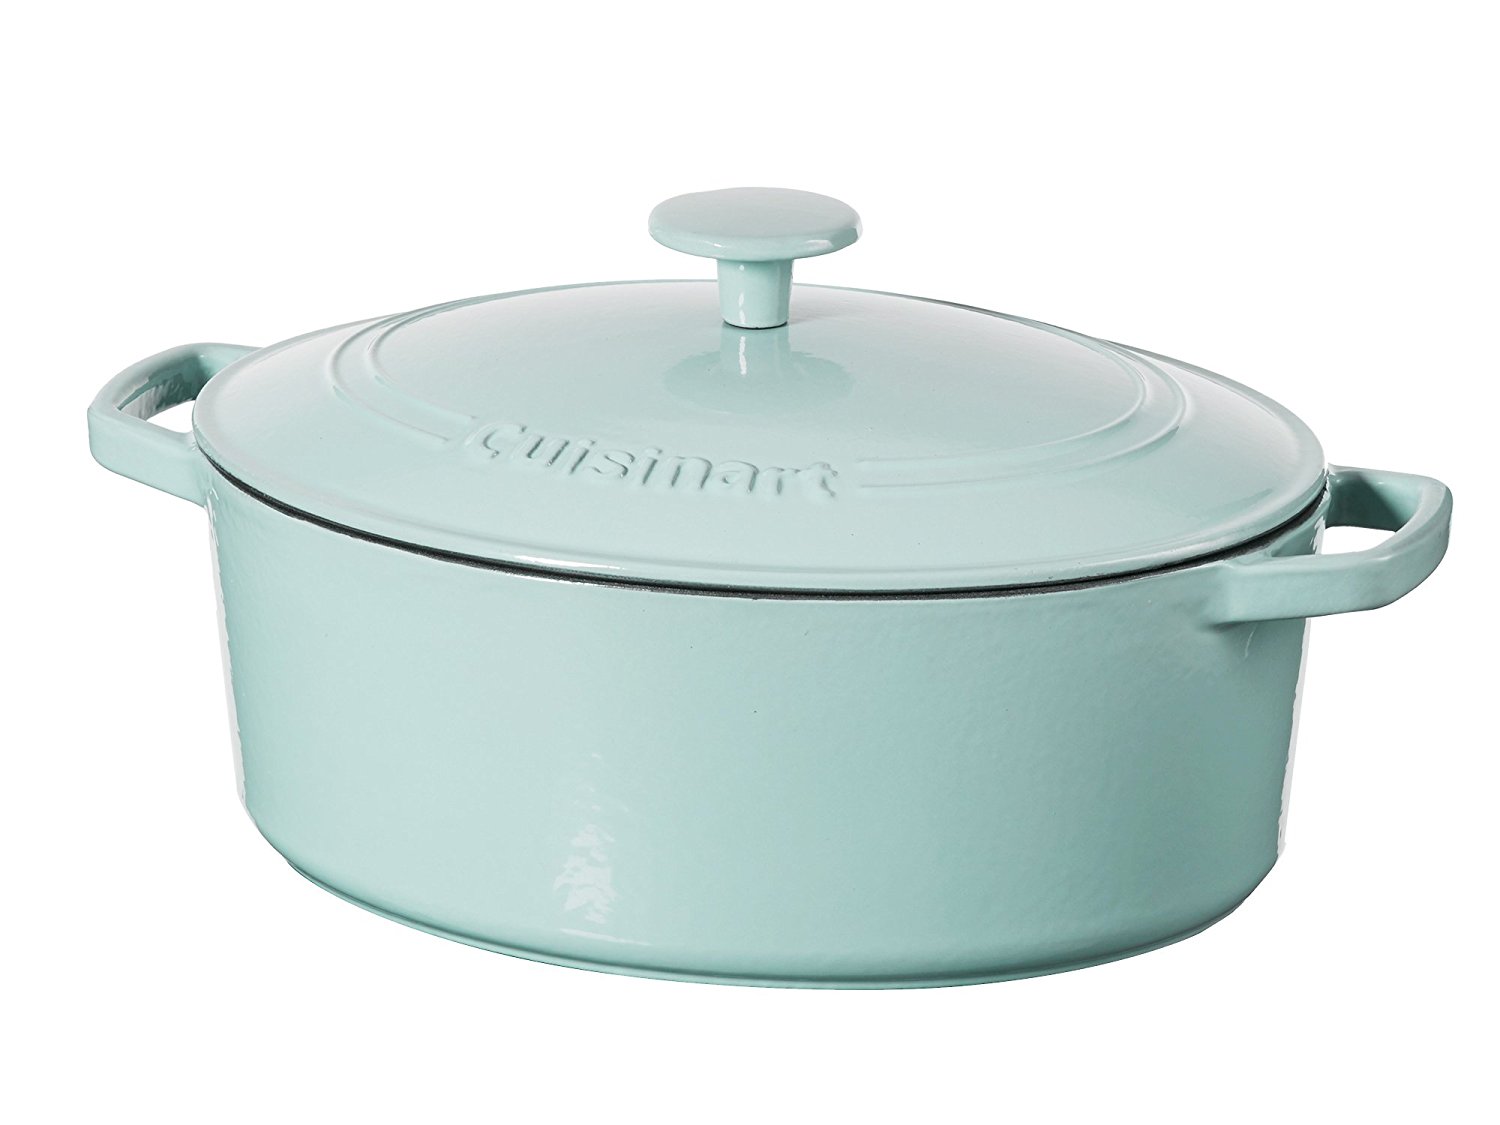 Save on Cast Iron Cookware from Cuisinart! Priced from $54.99!